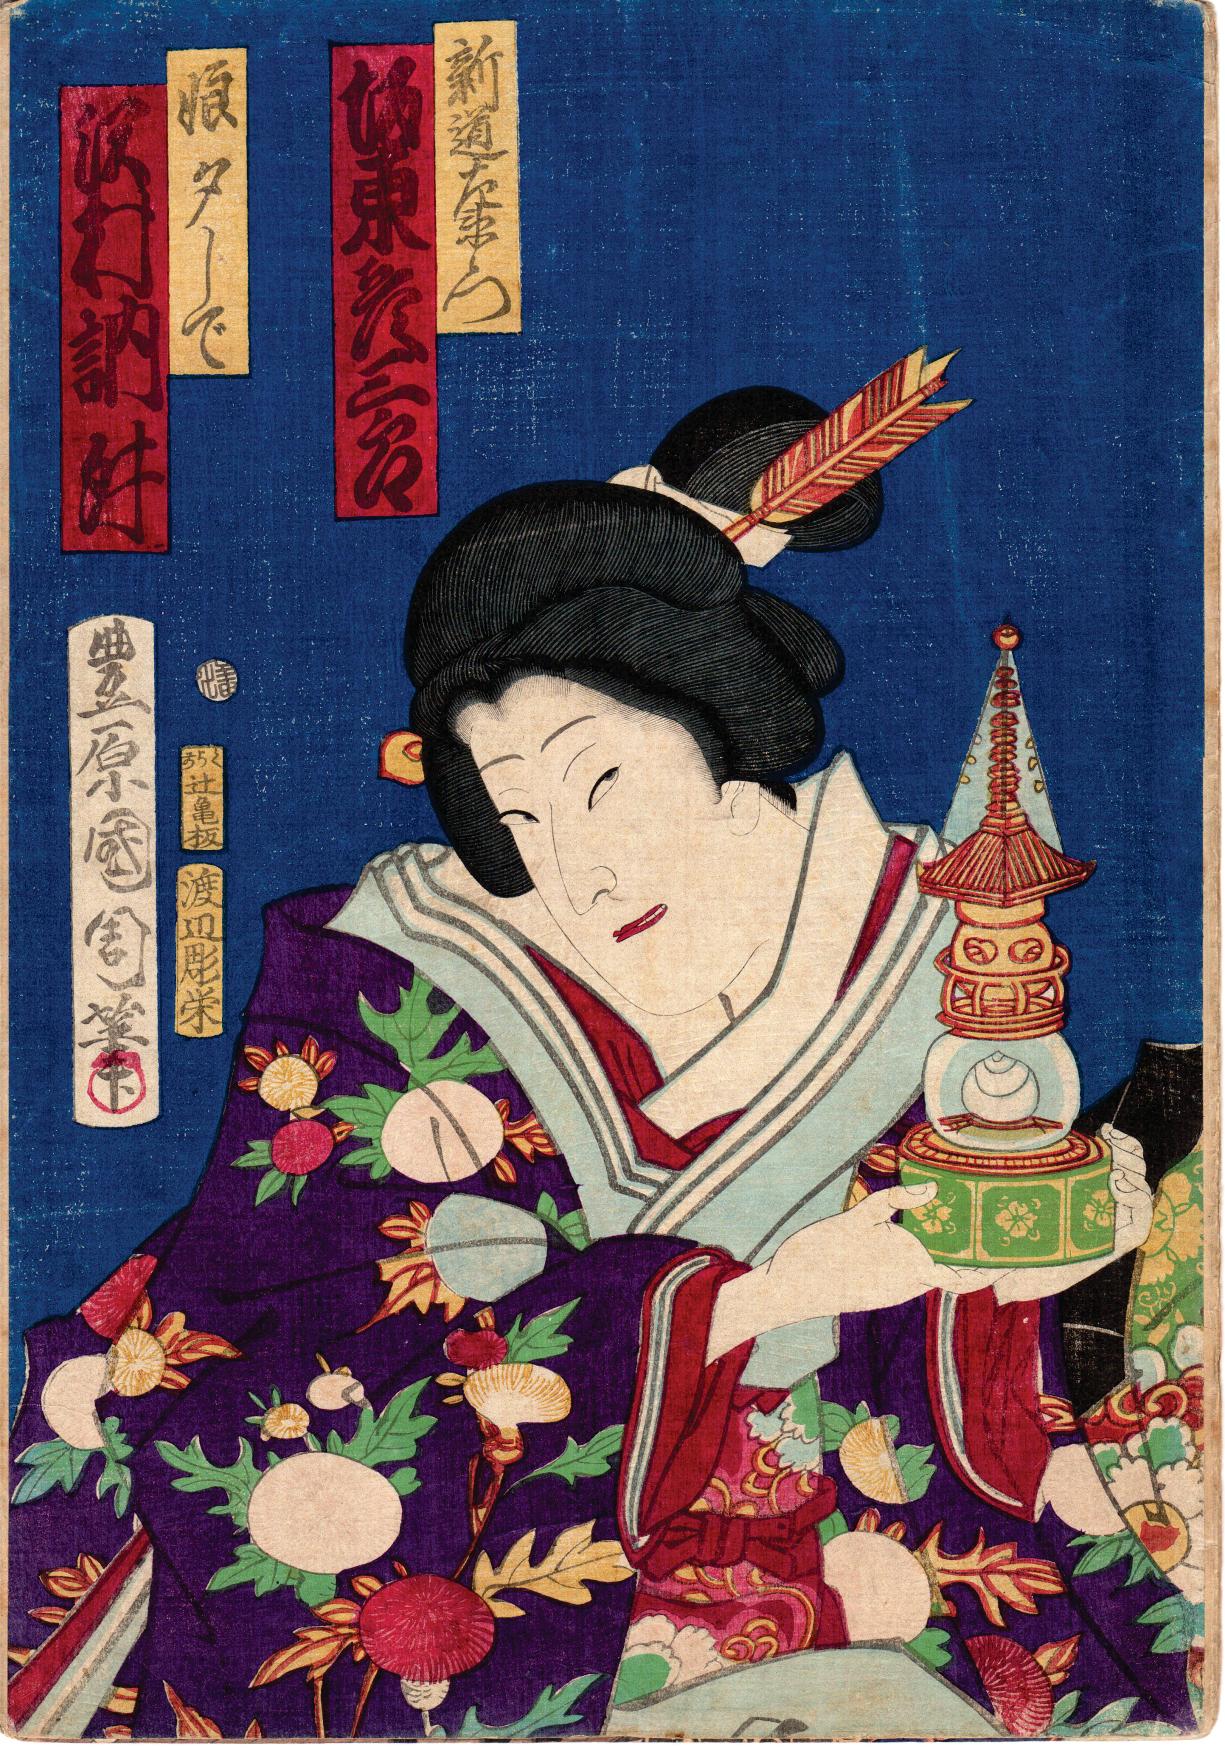 Hand-Painted 2 Japanese Woodblock Prints 'Double-Side' by Toyohara Kunichika and Shosai Ikkei For Sale